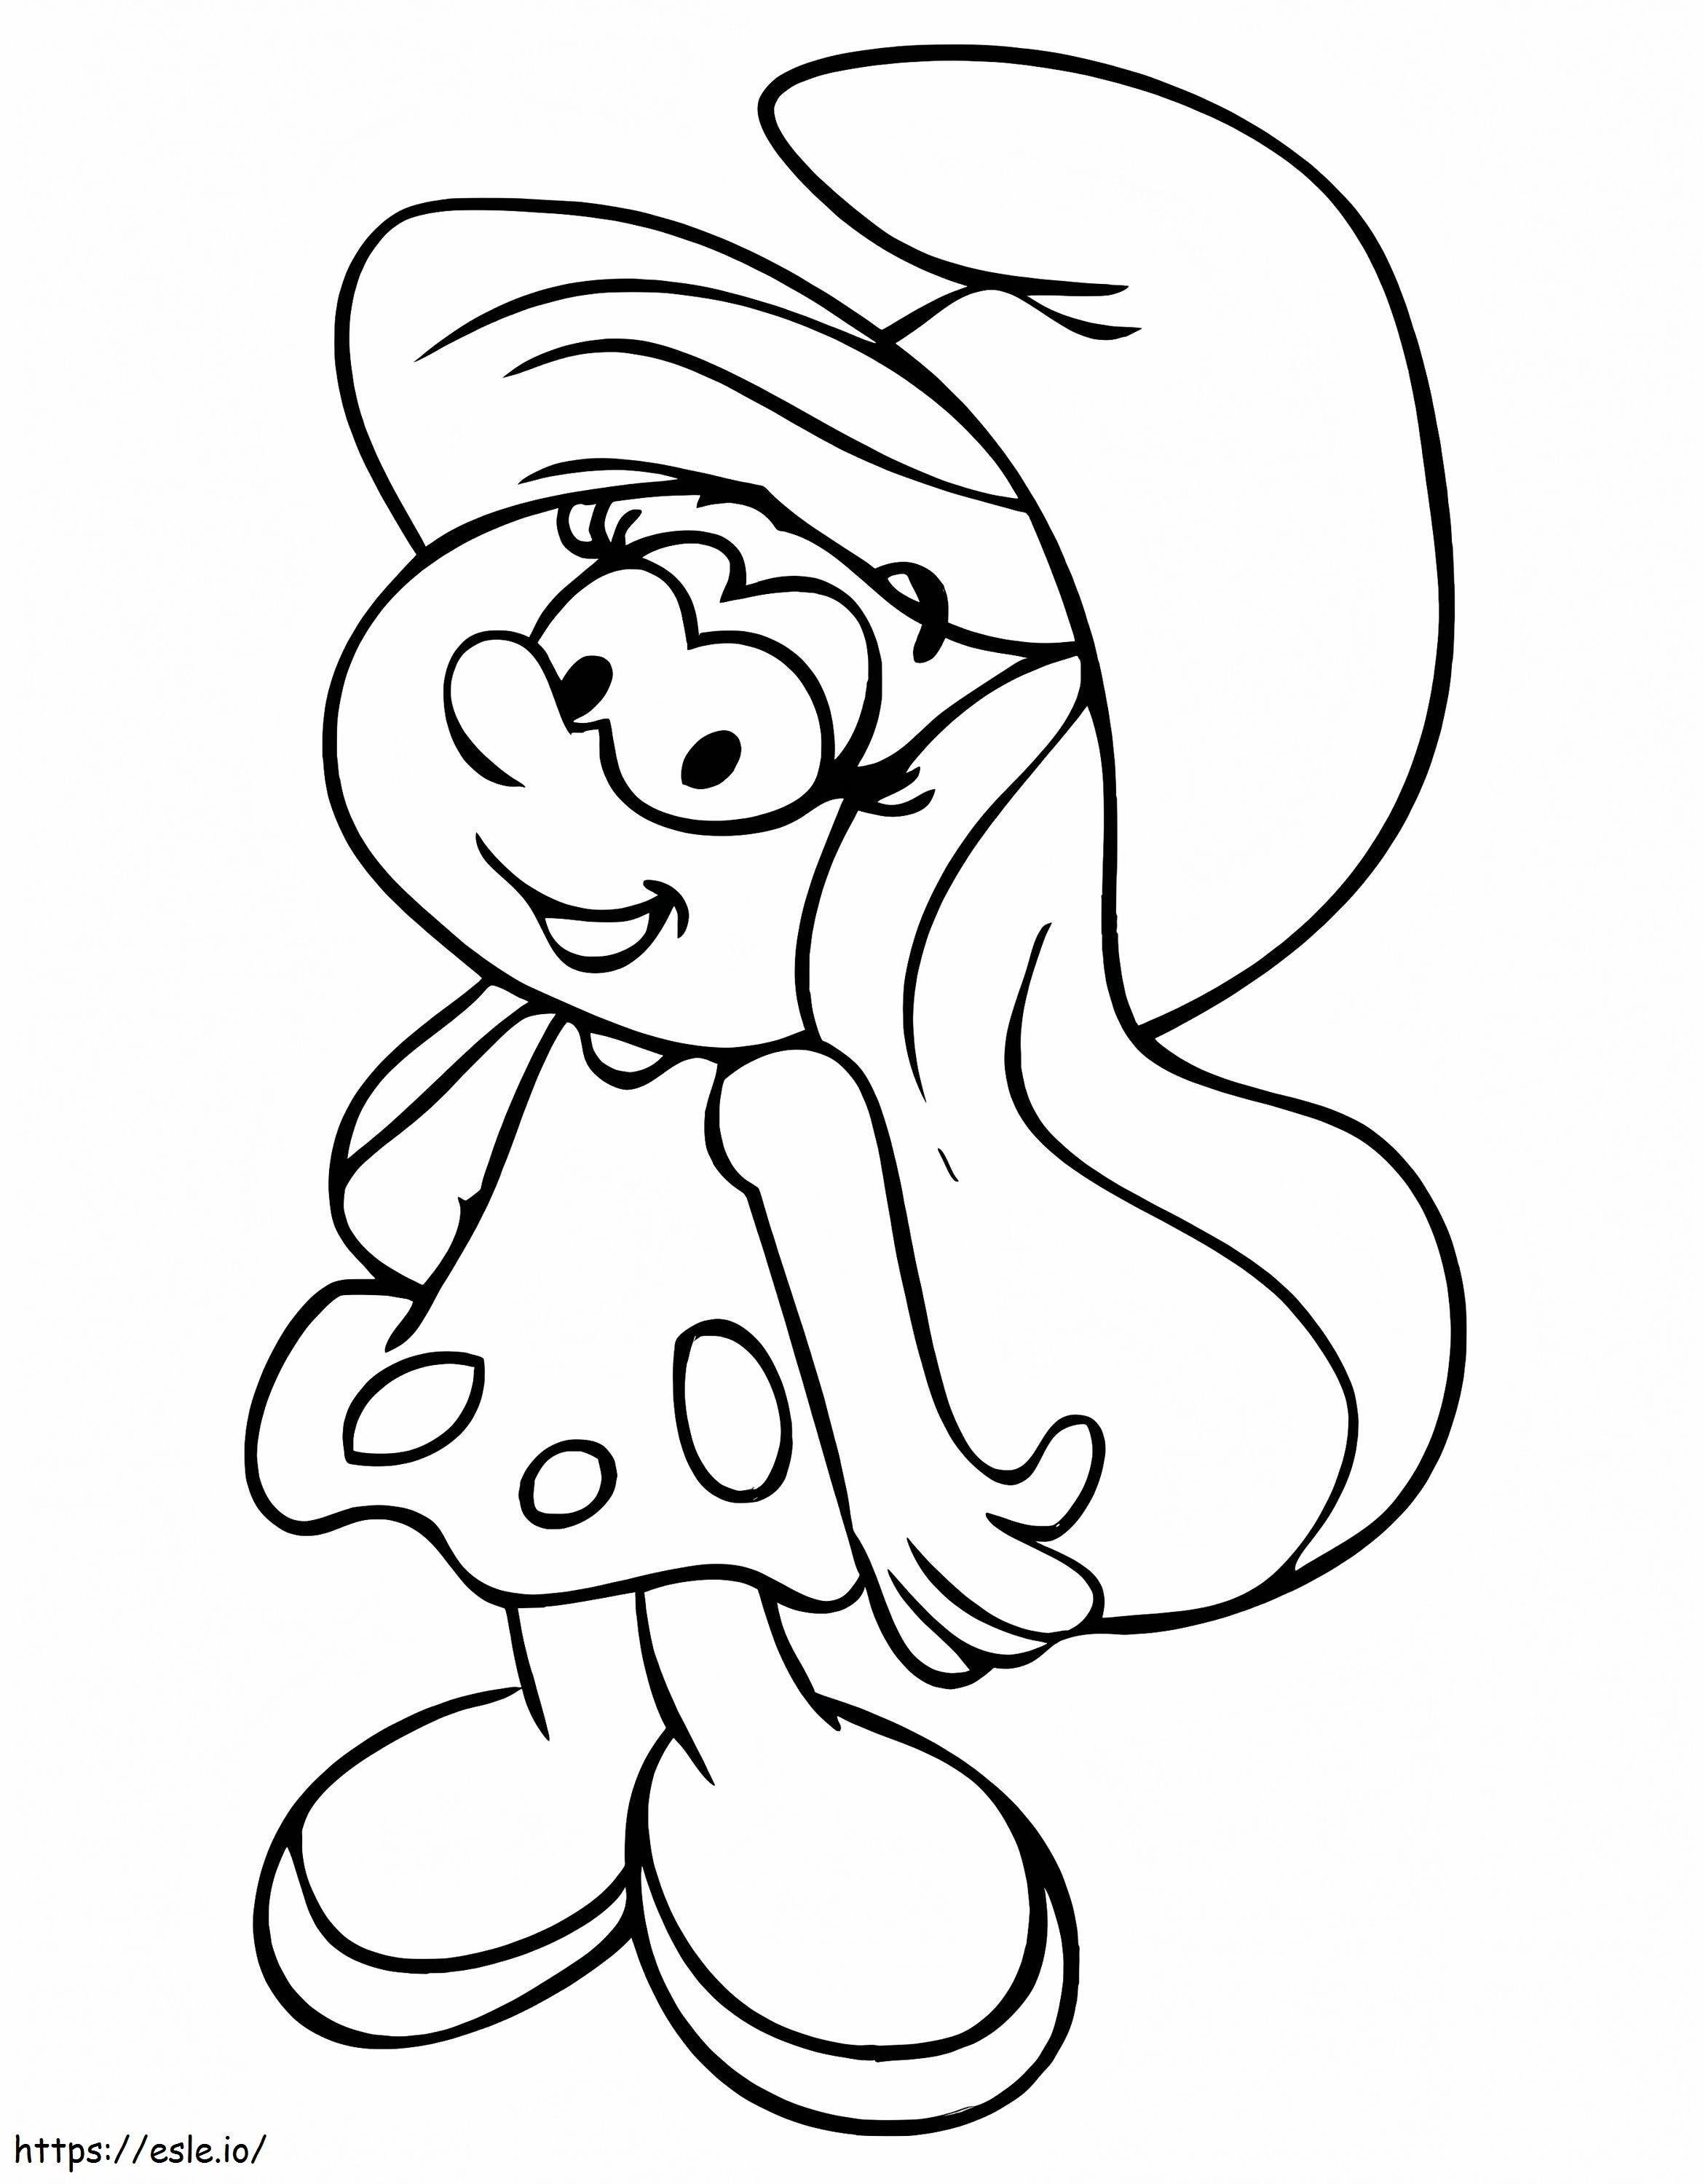 Funny Smurfette coloring page